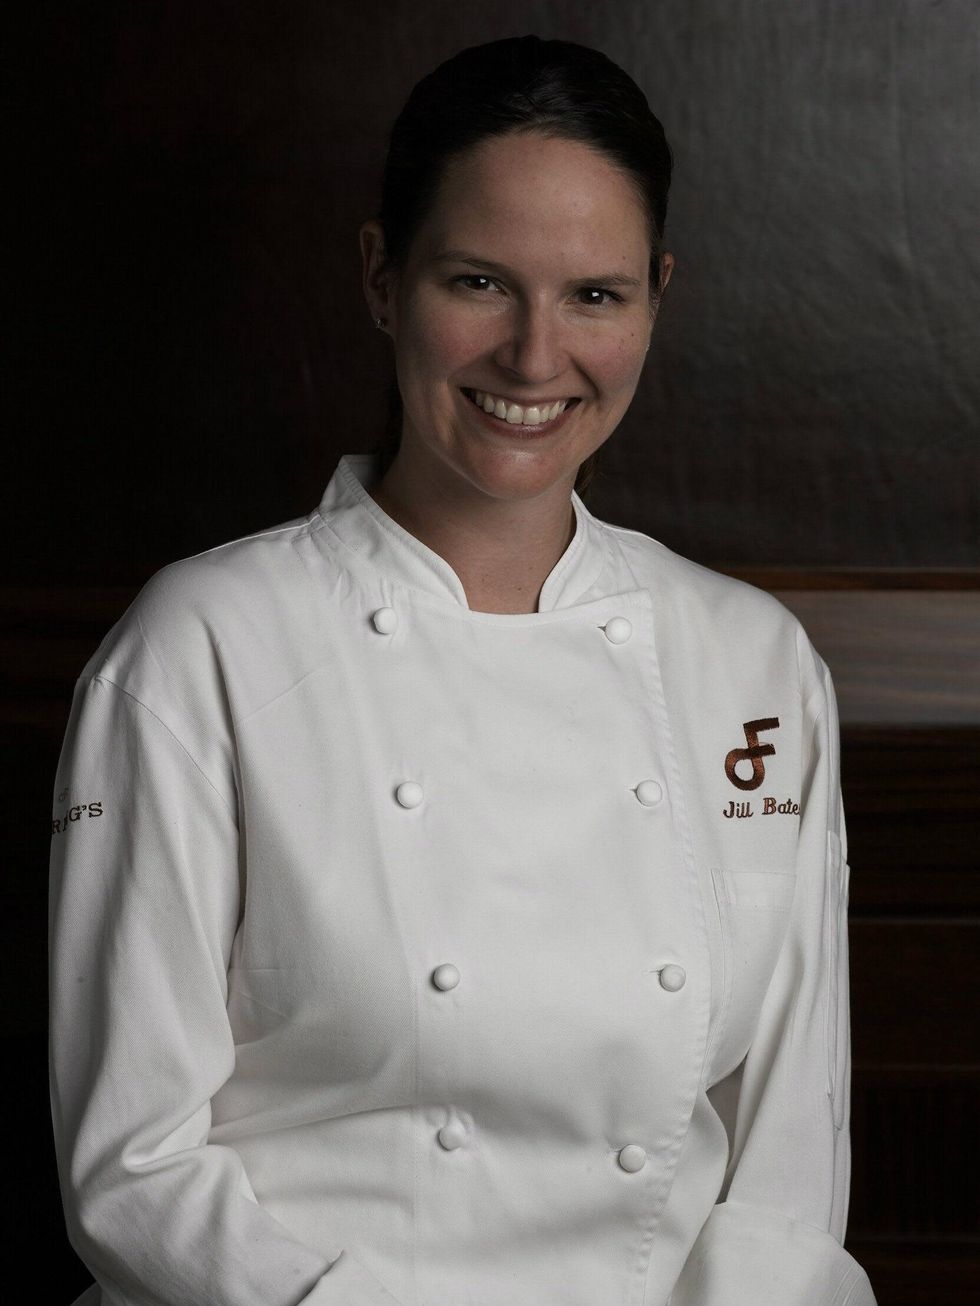 Pastry chef Jill Bates of Fearing's restaurant in Dallas